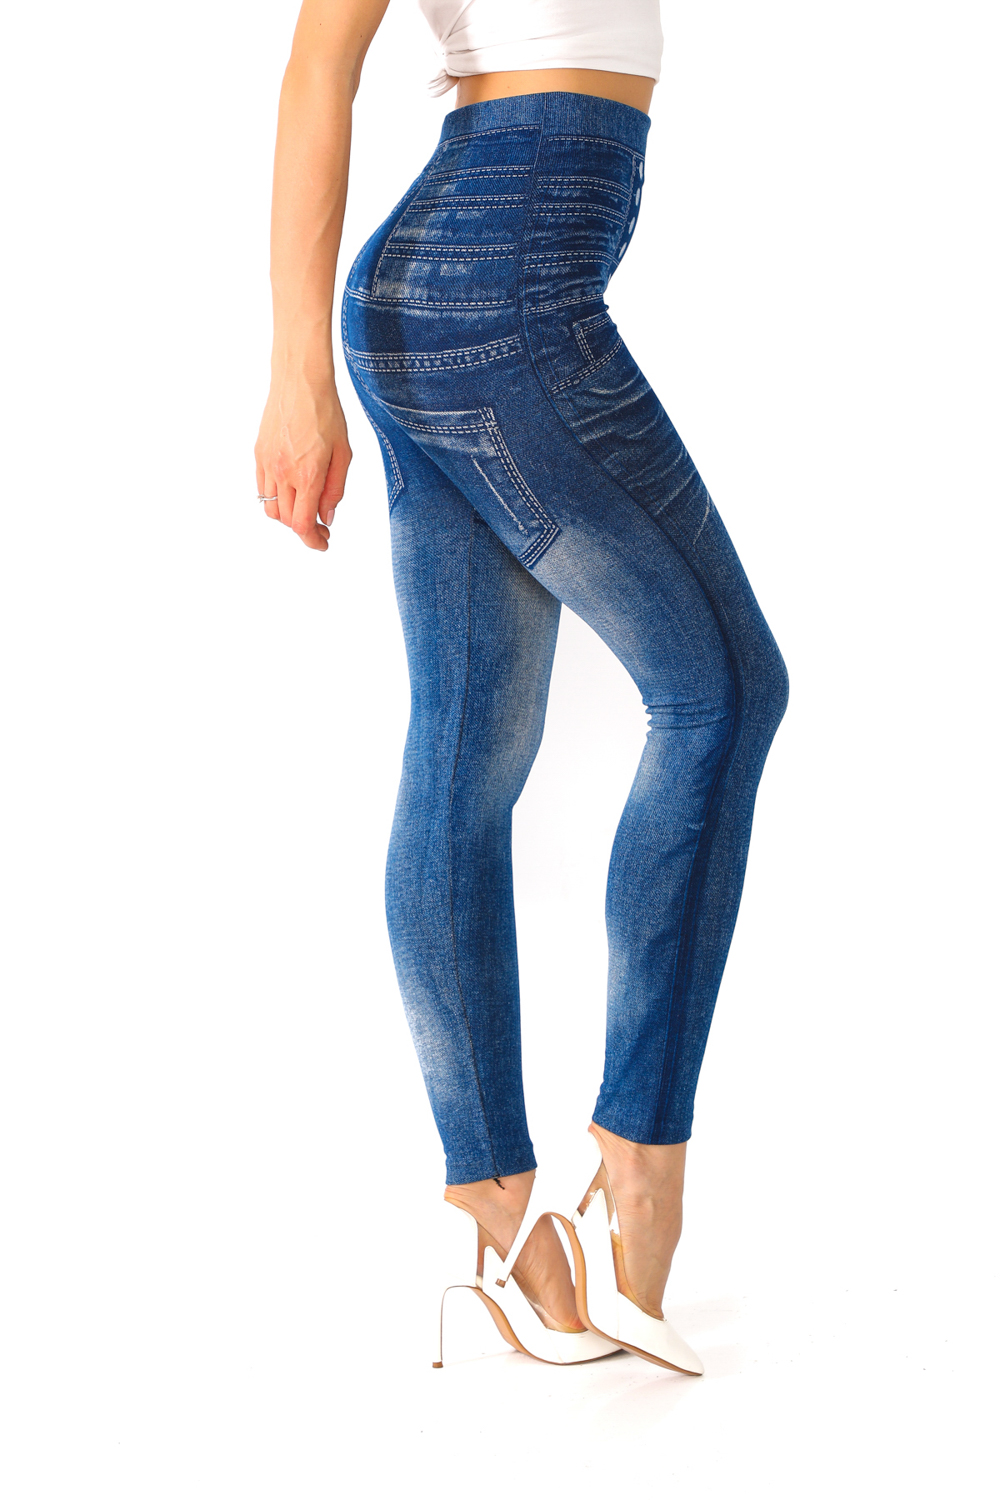 Faux Jeans Leggings with Fake Pockets and Buttons Pattern - Its